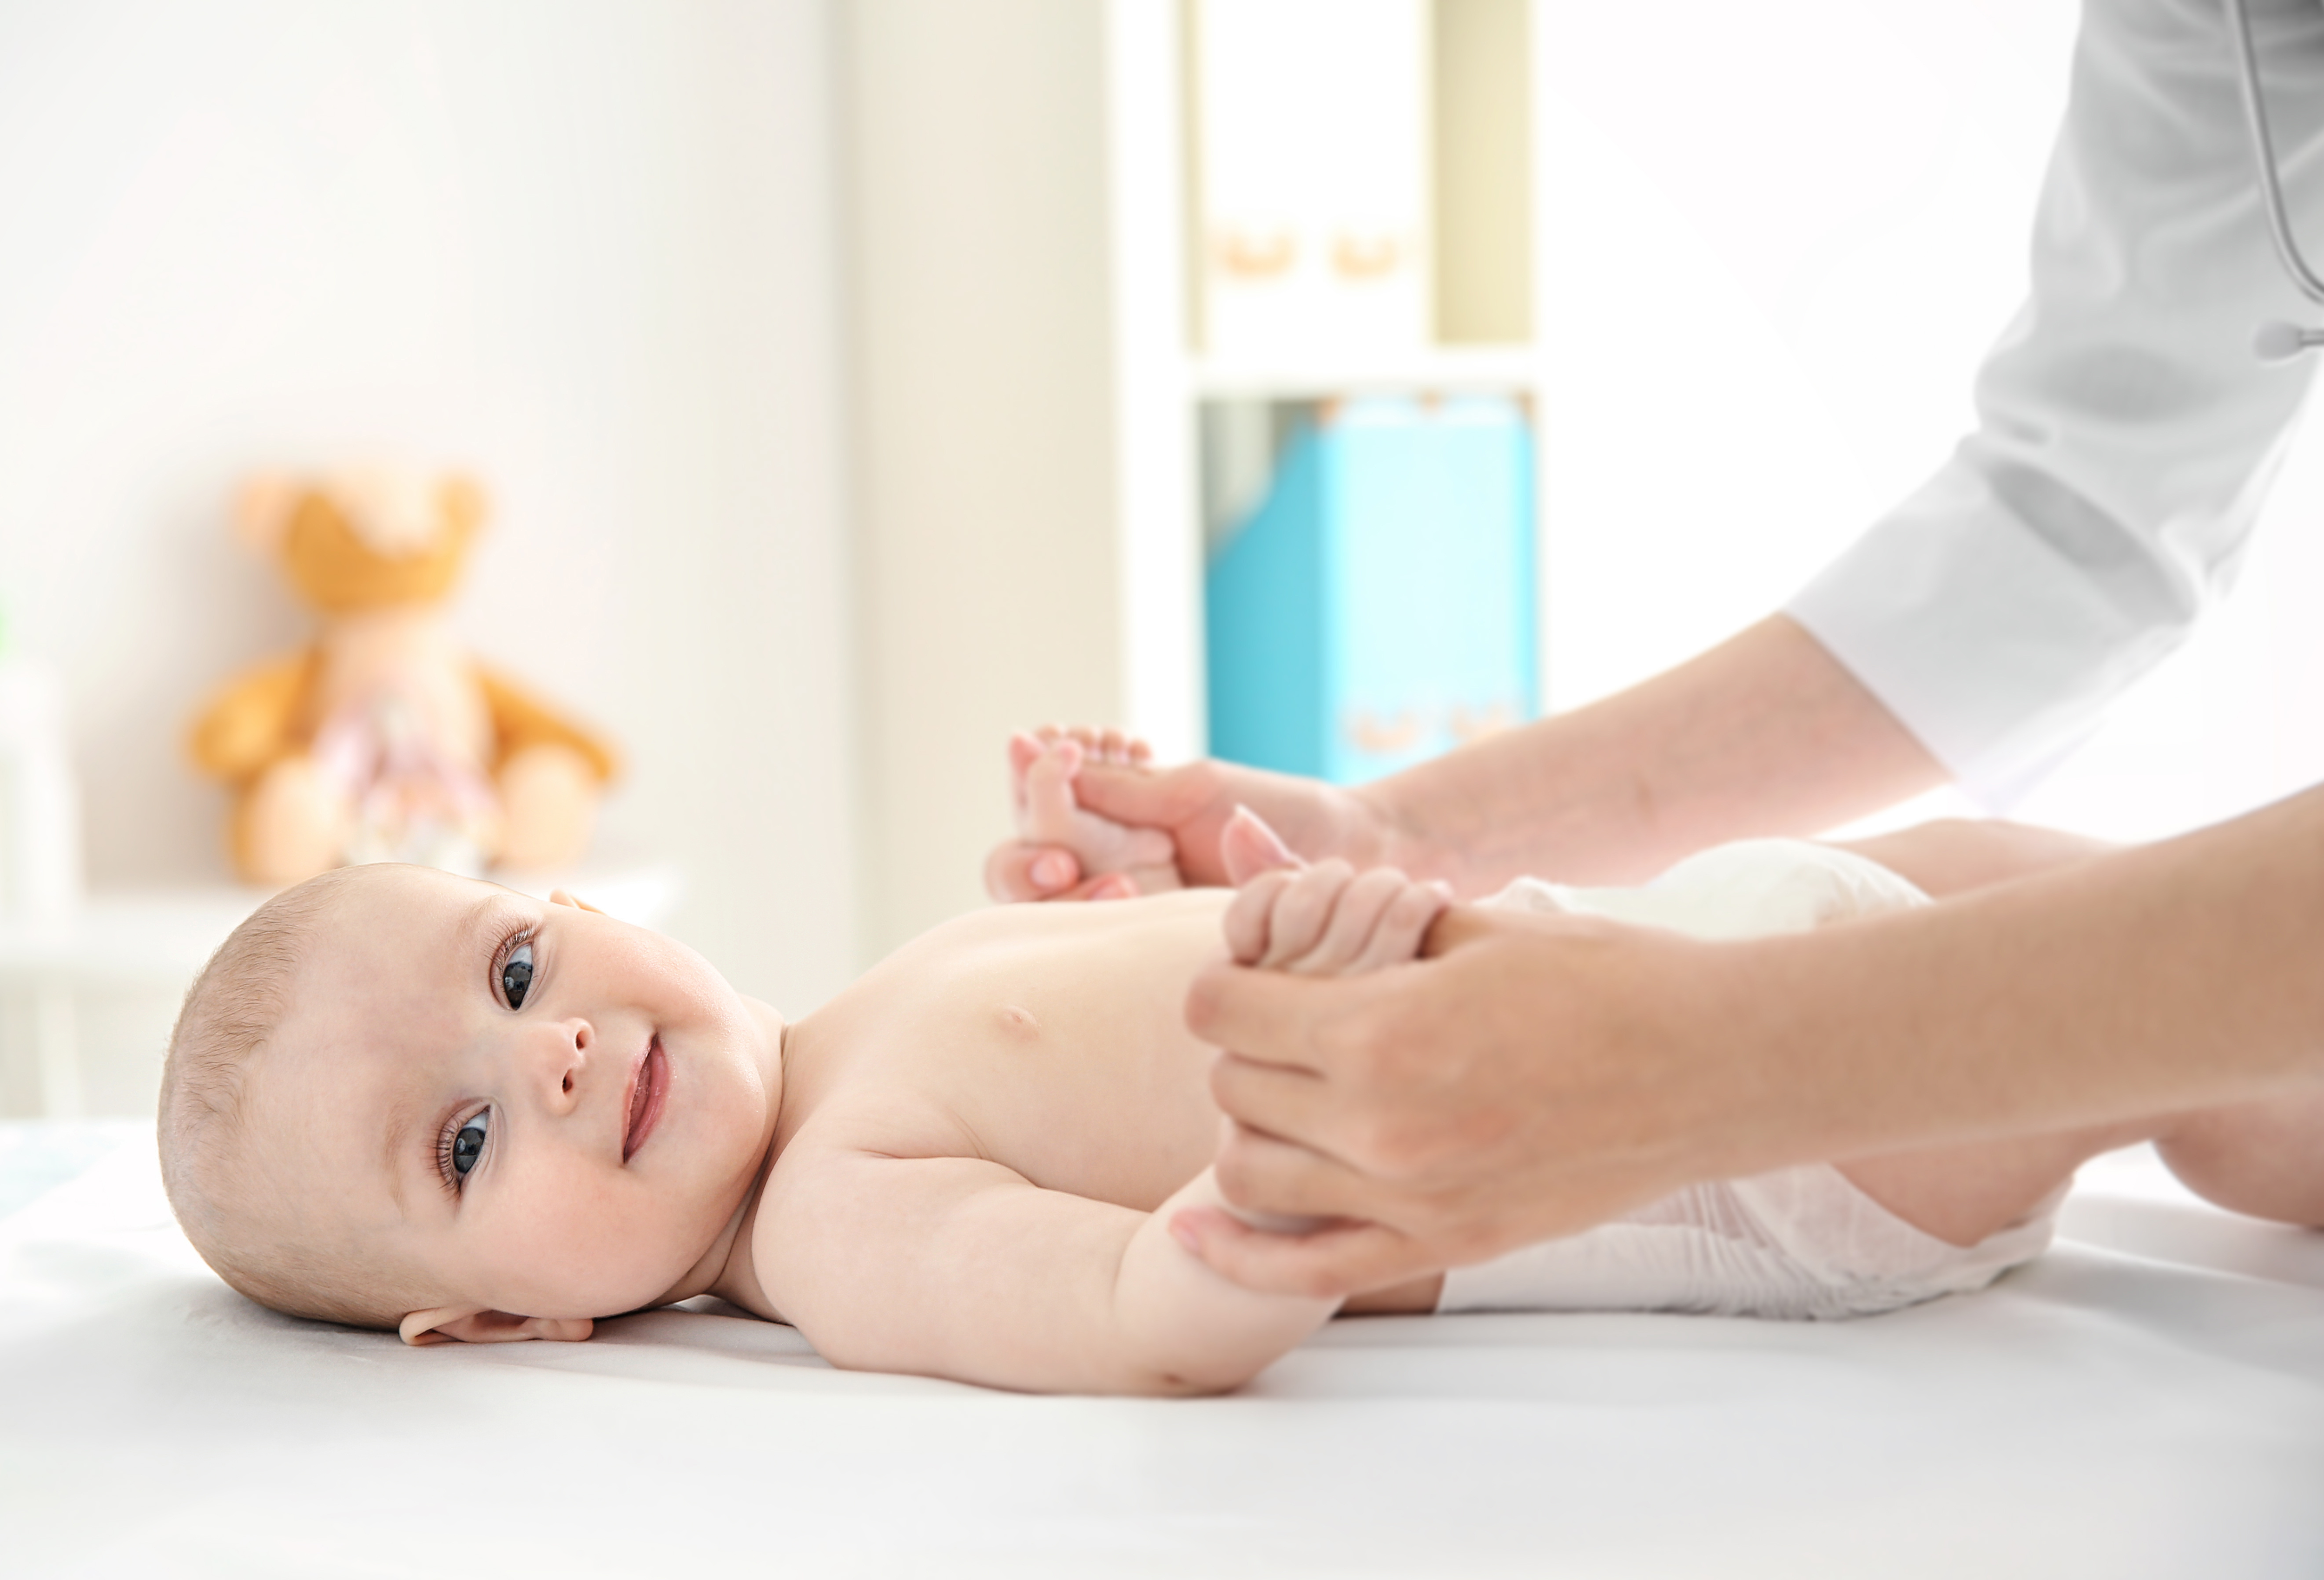 Did you know that Itchy Baby Co. products are dermatologically tested?